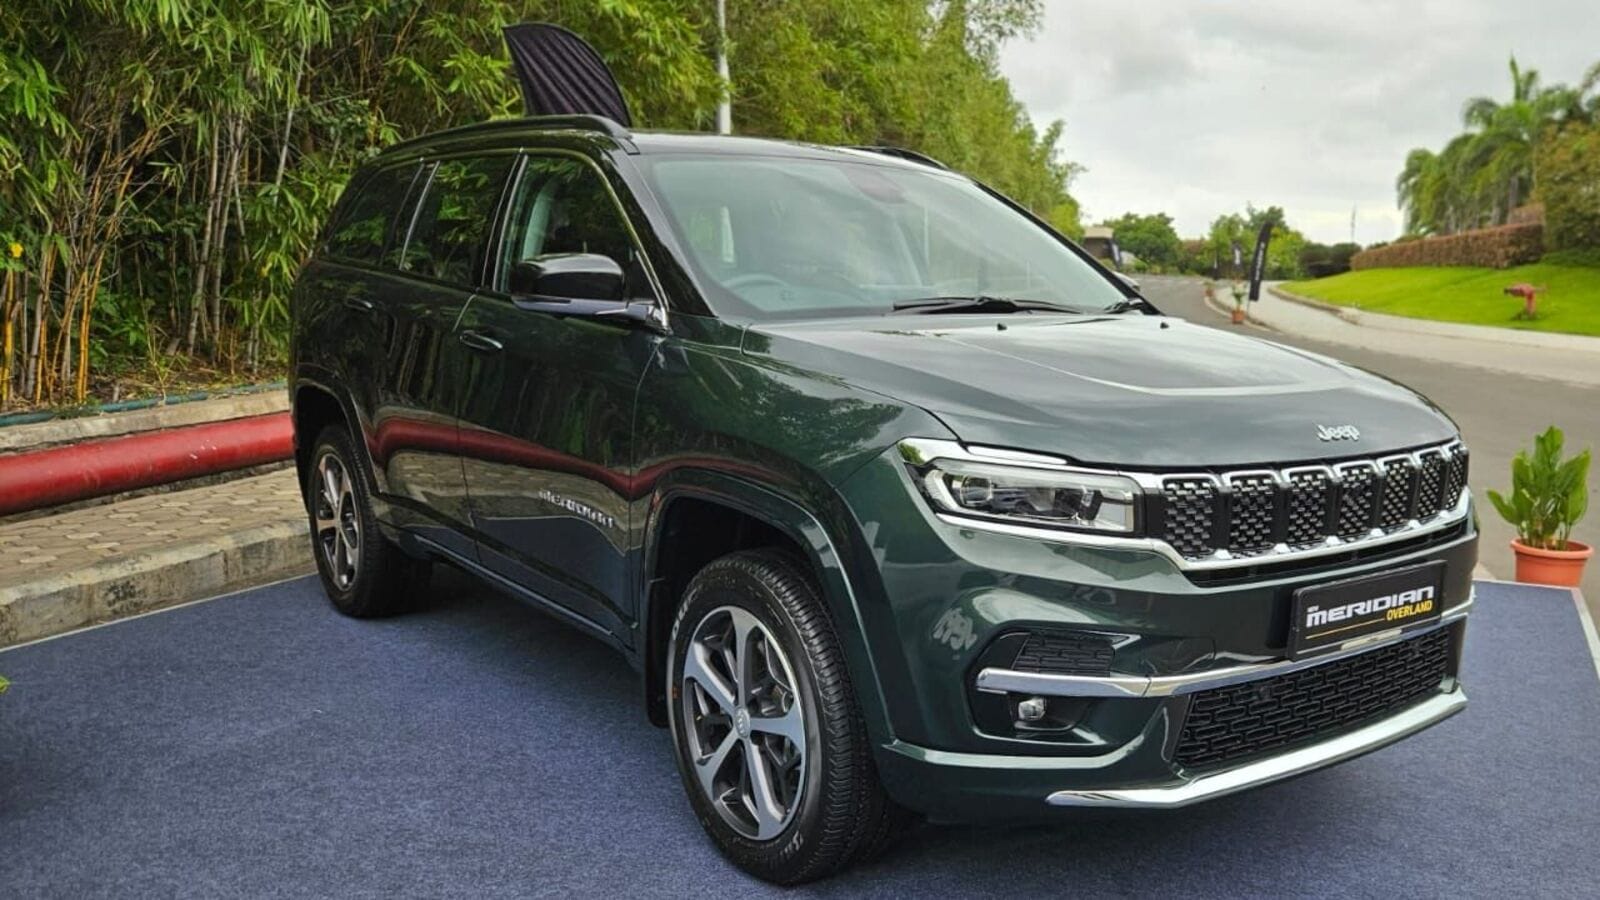 Jeep Meridian facelift confirmed to launch later this year